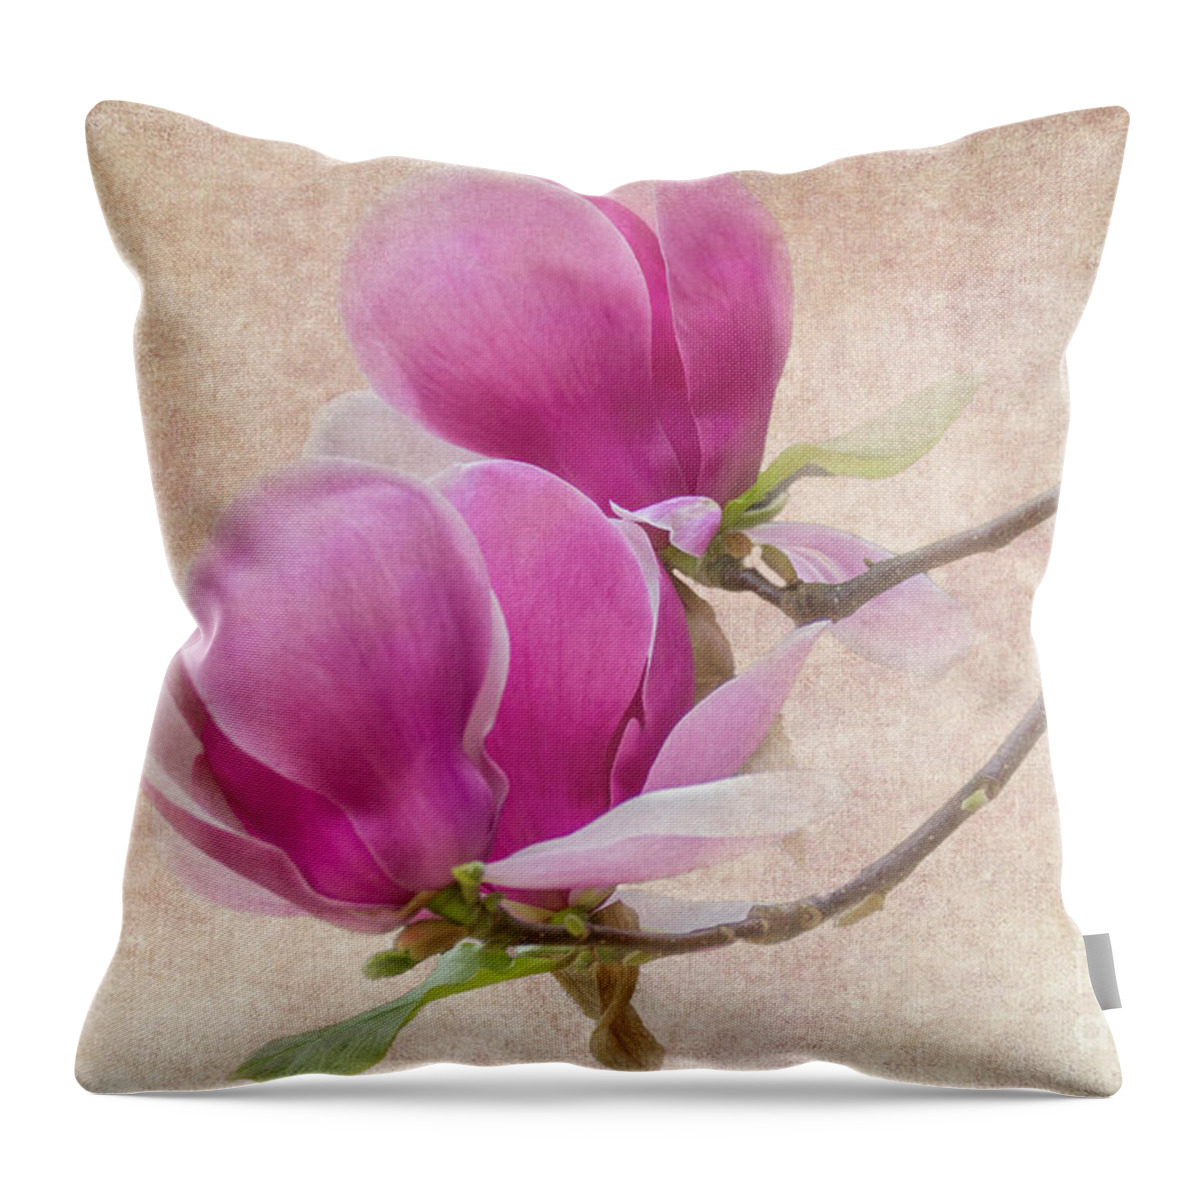 Magnolia Throw Pillow featuring the photograph Purple Tulip Magnolia by Heiko Koehrer-Wagner